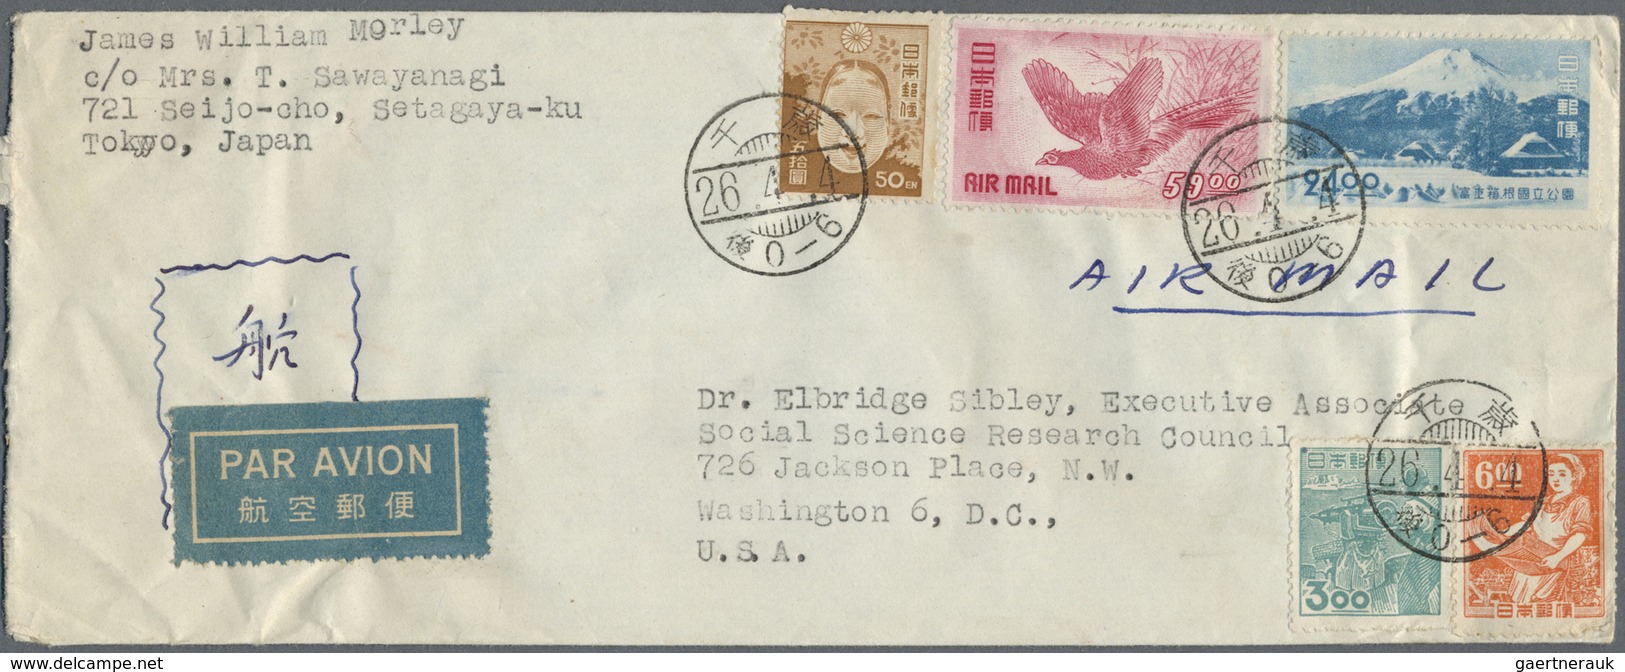 Br/GA Japan: 1875/1952, covers/mint and used stationery (13, inc.  field post card c/o 415 FPO used in Man